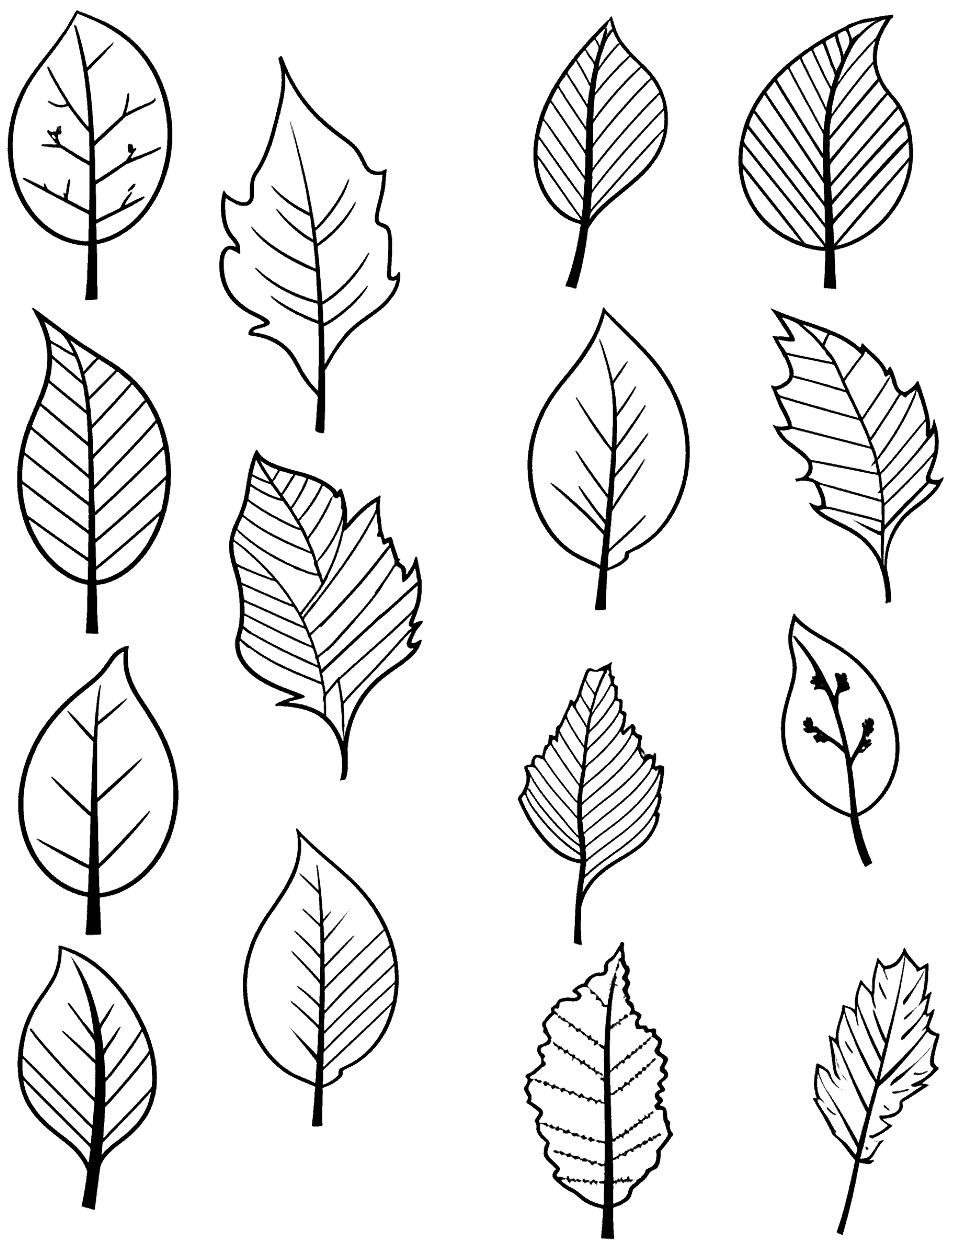 Simple Leaf Designs Fall Coloring Page - An easy coloring sheet featuring various leaf shapes and patterns, suitable for 2-year-olds.